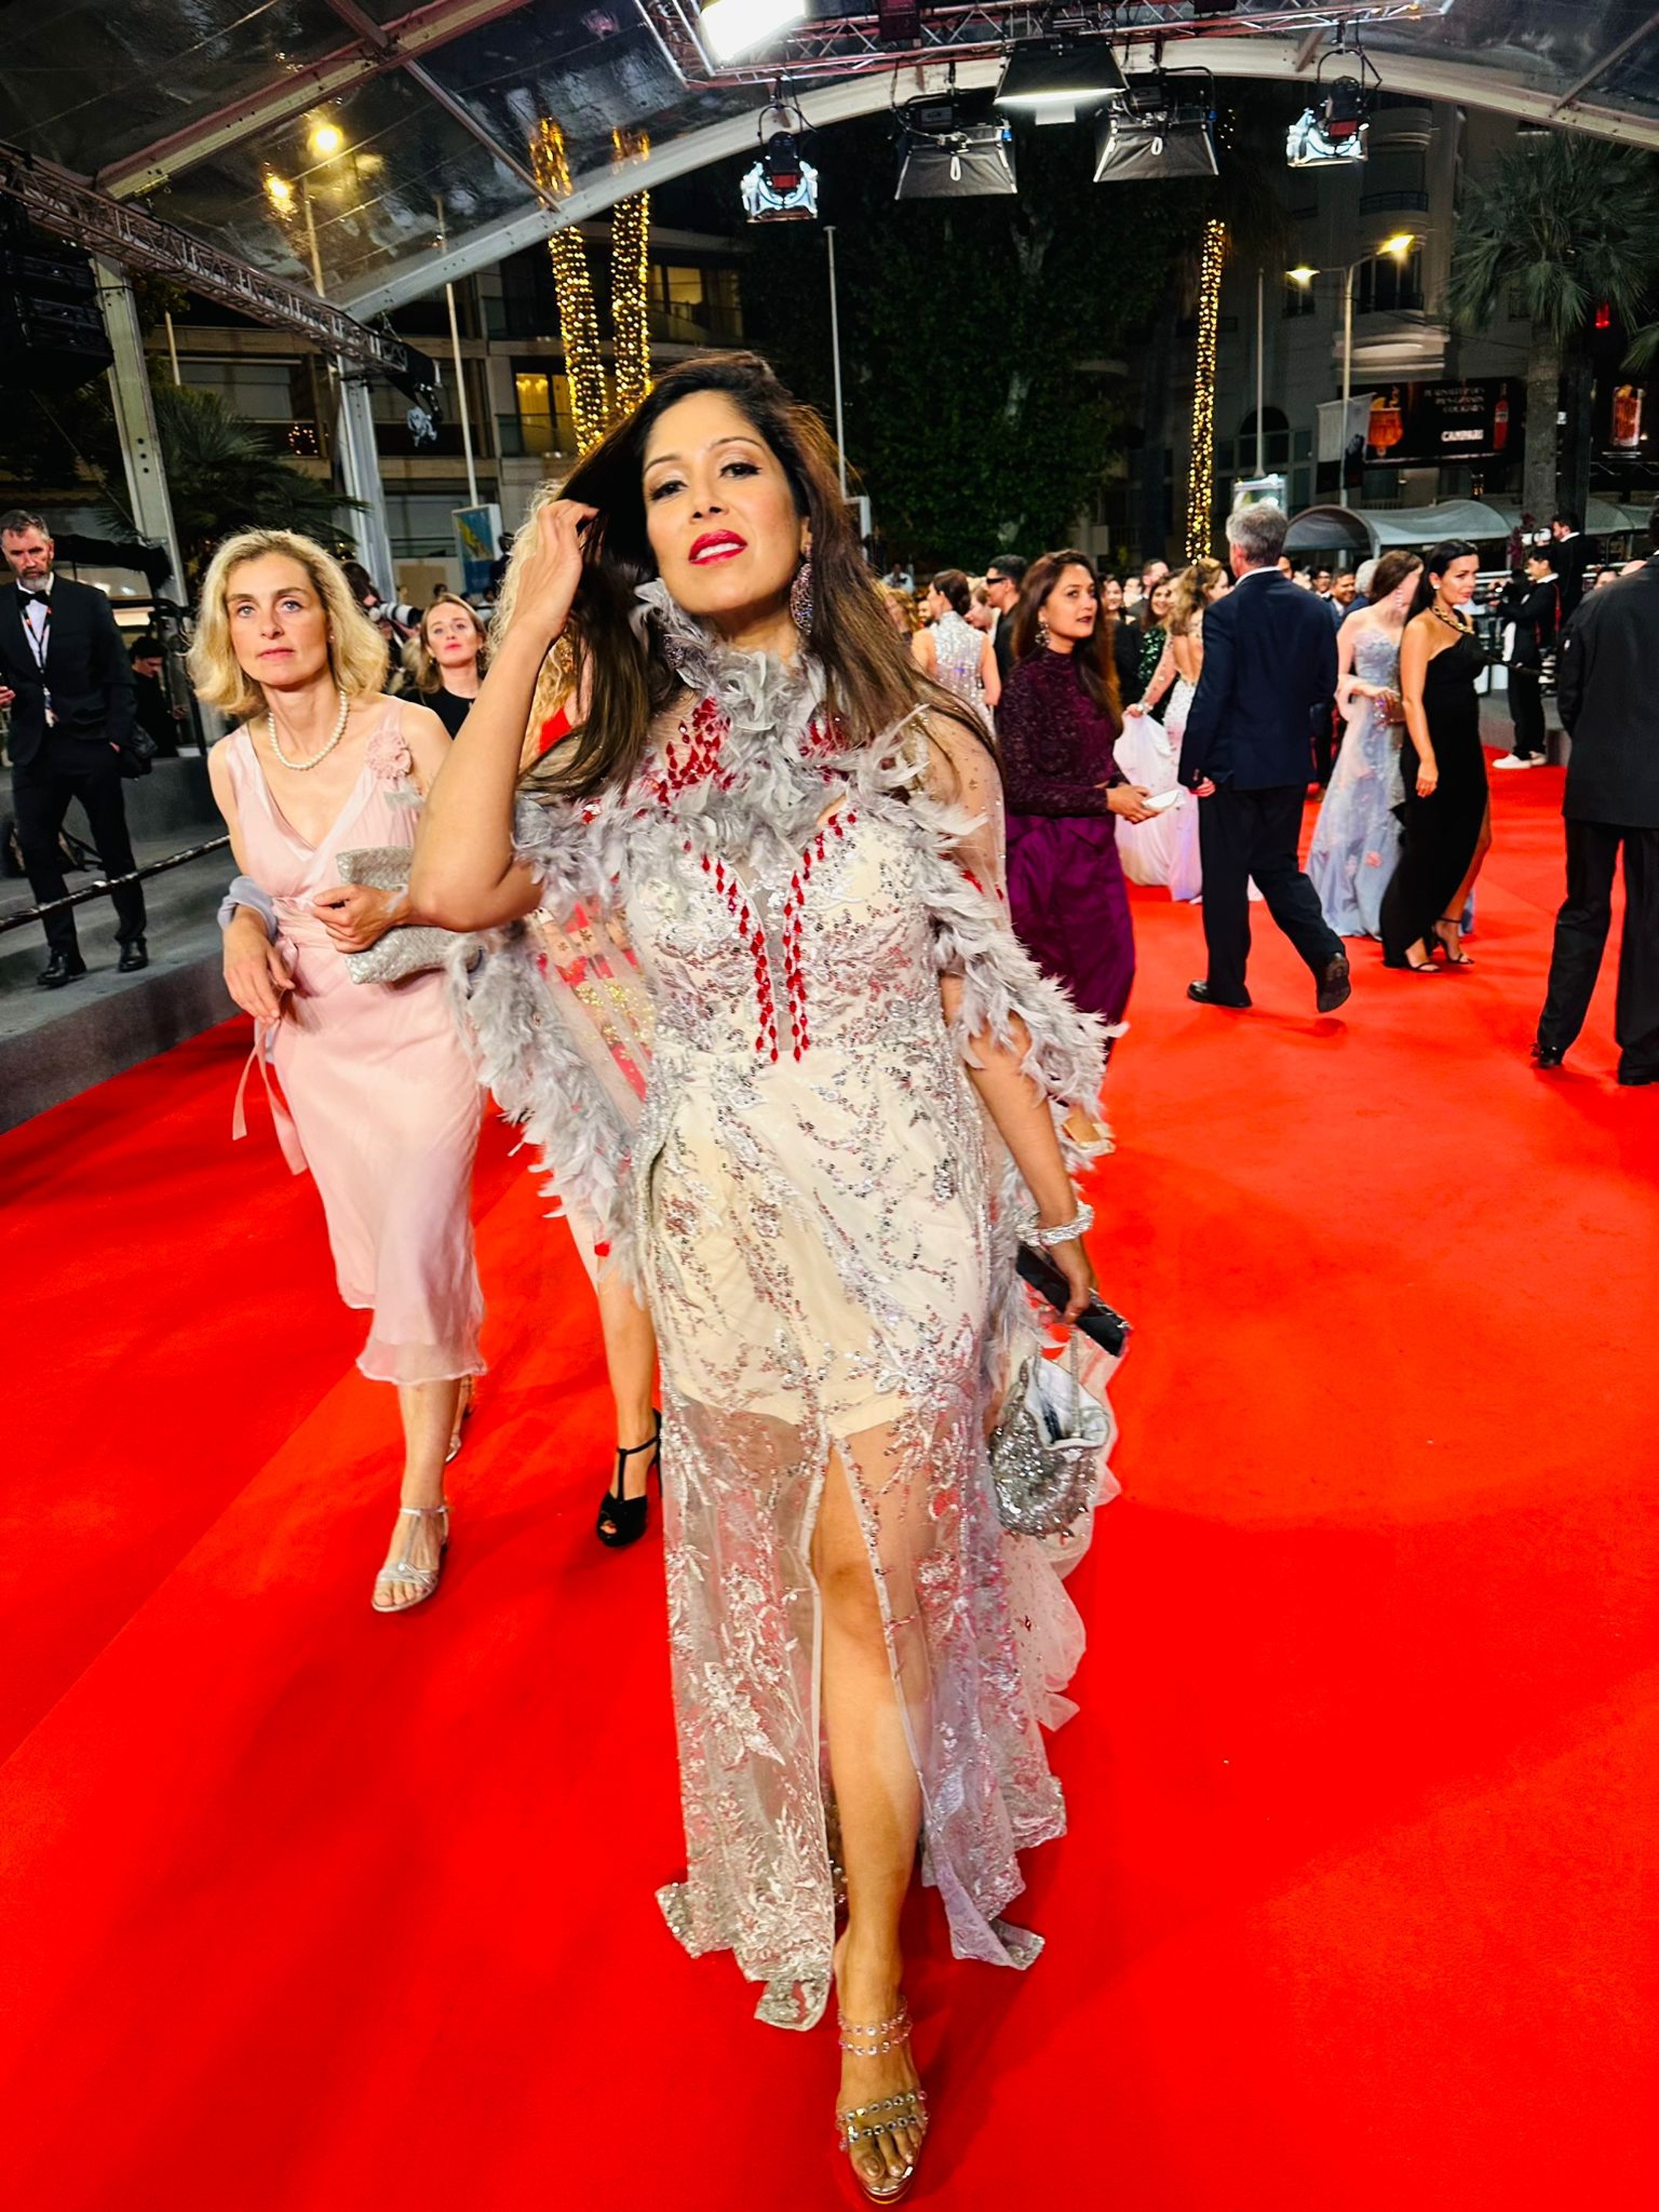 Mrs universe East America Janhavi Rane made her Cannes red carpet debut in Anjali phougat luxury couture